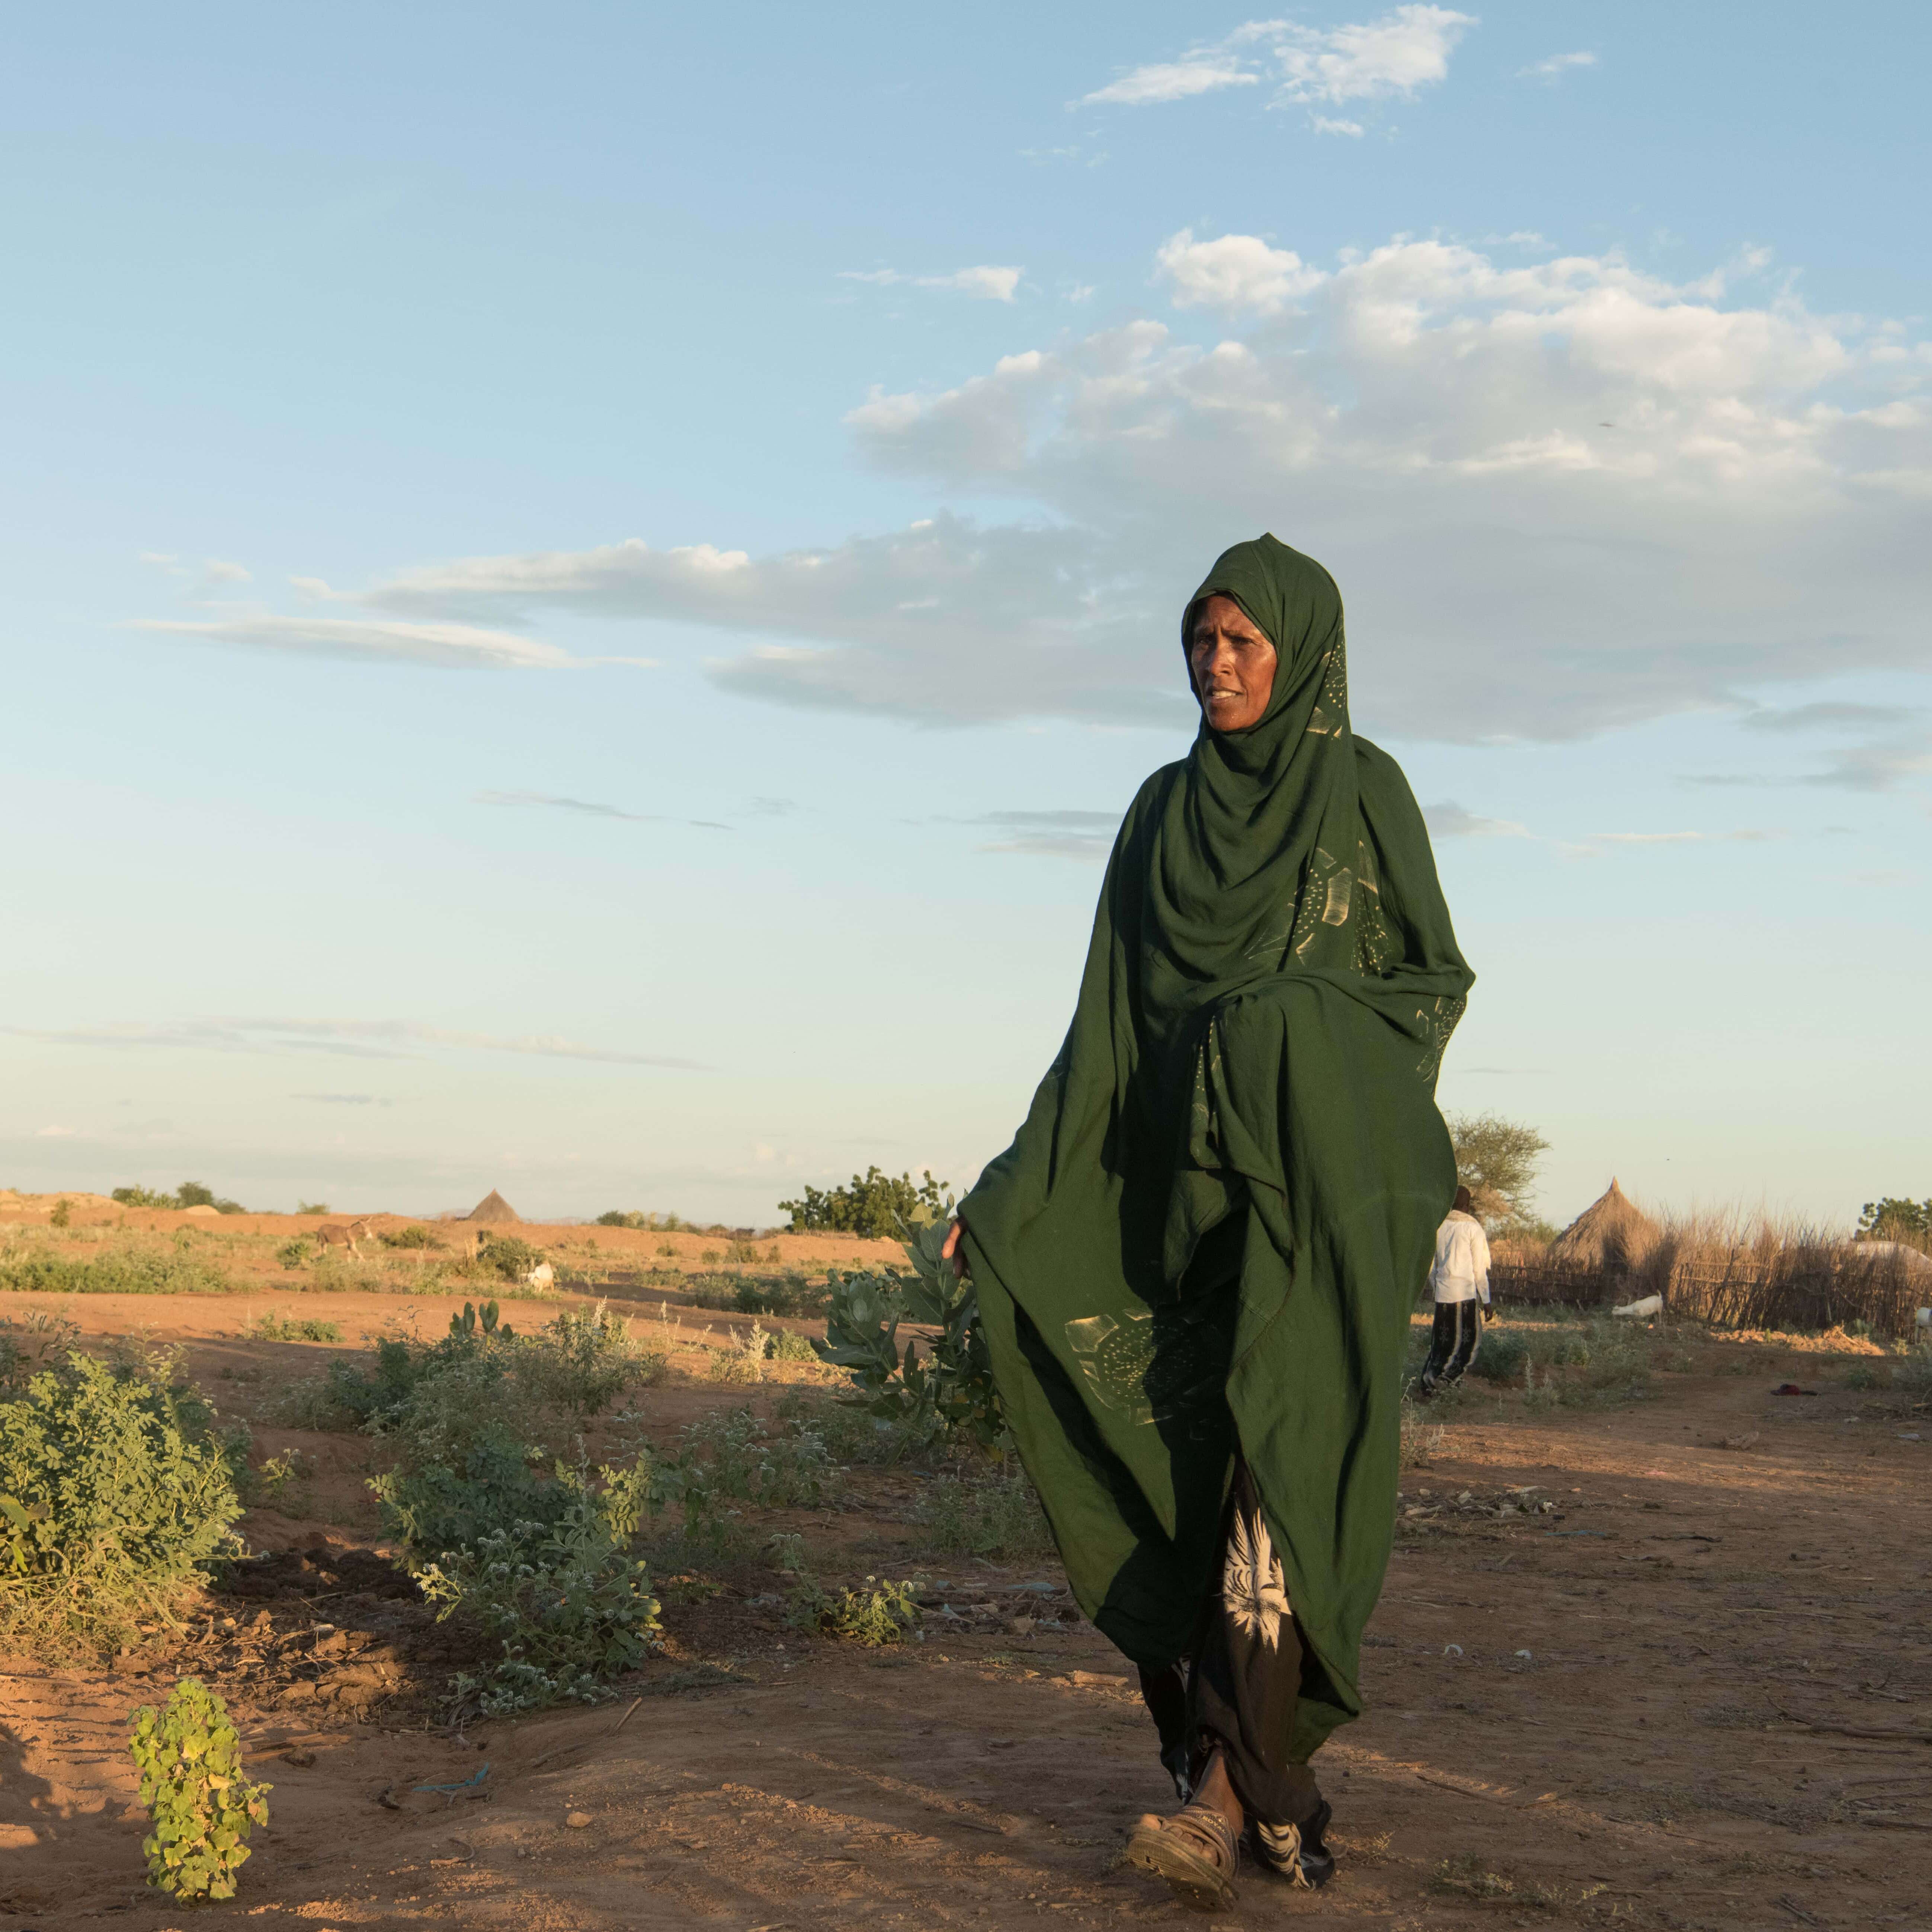 For three years, Nurad struggled to cultivate crops on her farm in Kulan Challe Village due to the severe drought in Ethiopia. When heavy rains finally came, they washed away her farm, her home, and what little crops she had. 